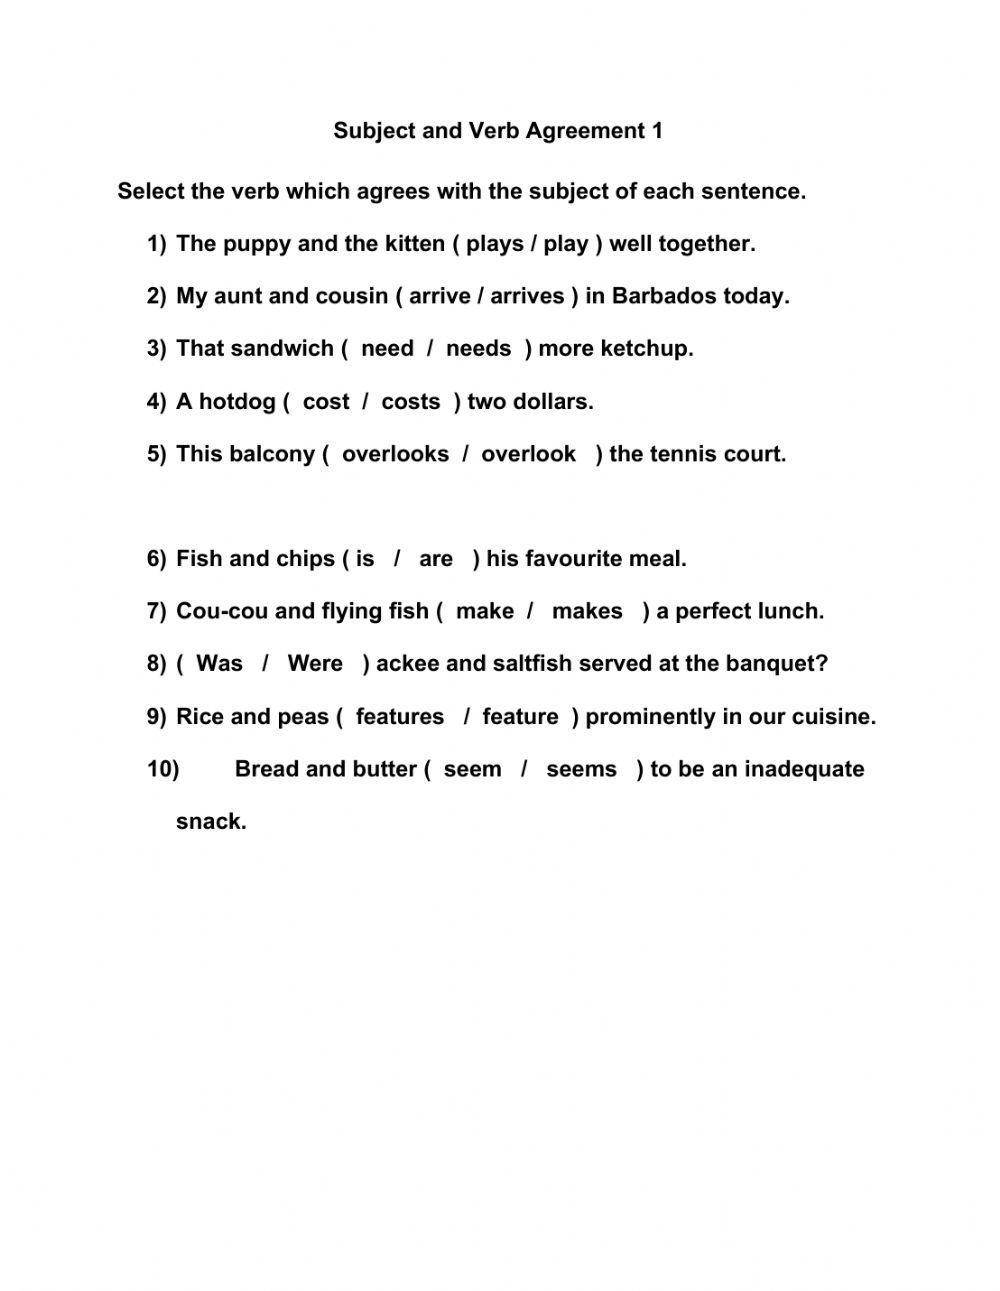 Subject and Verb Agreement 1